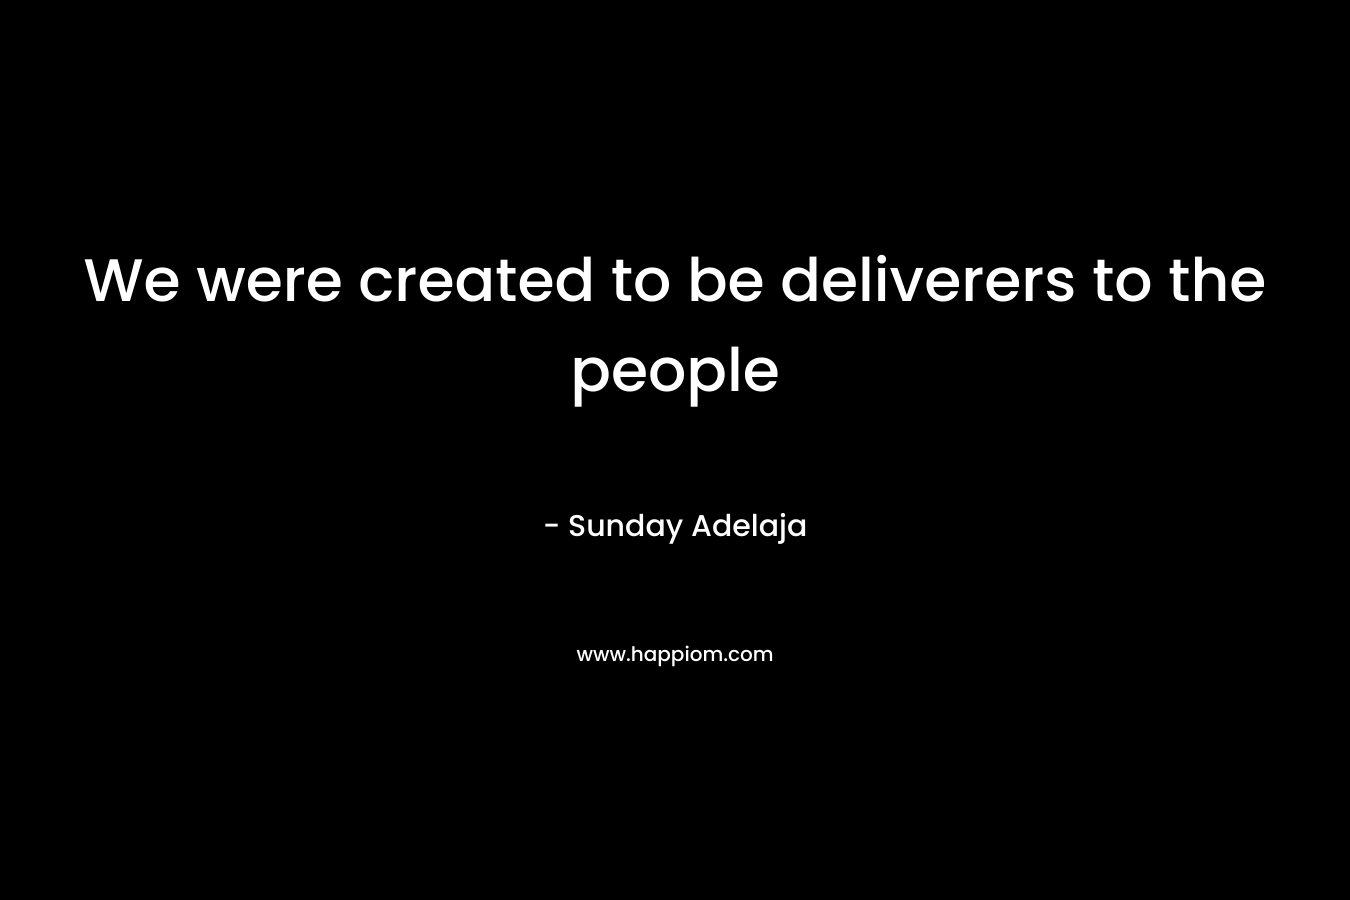 We were created to be deliverers to the people